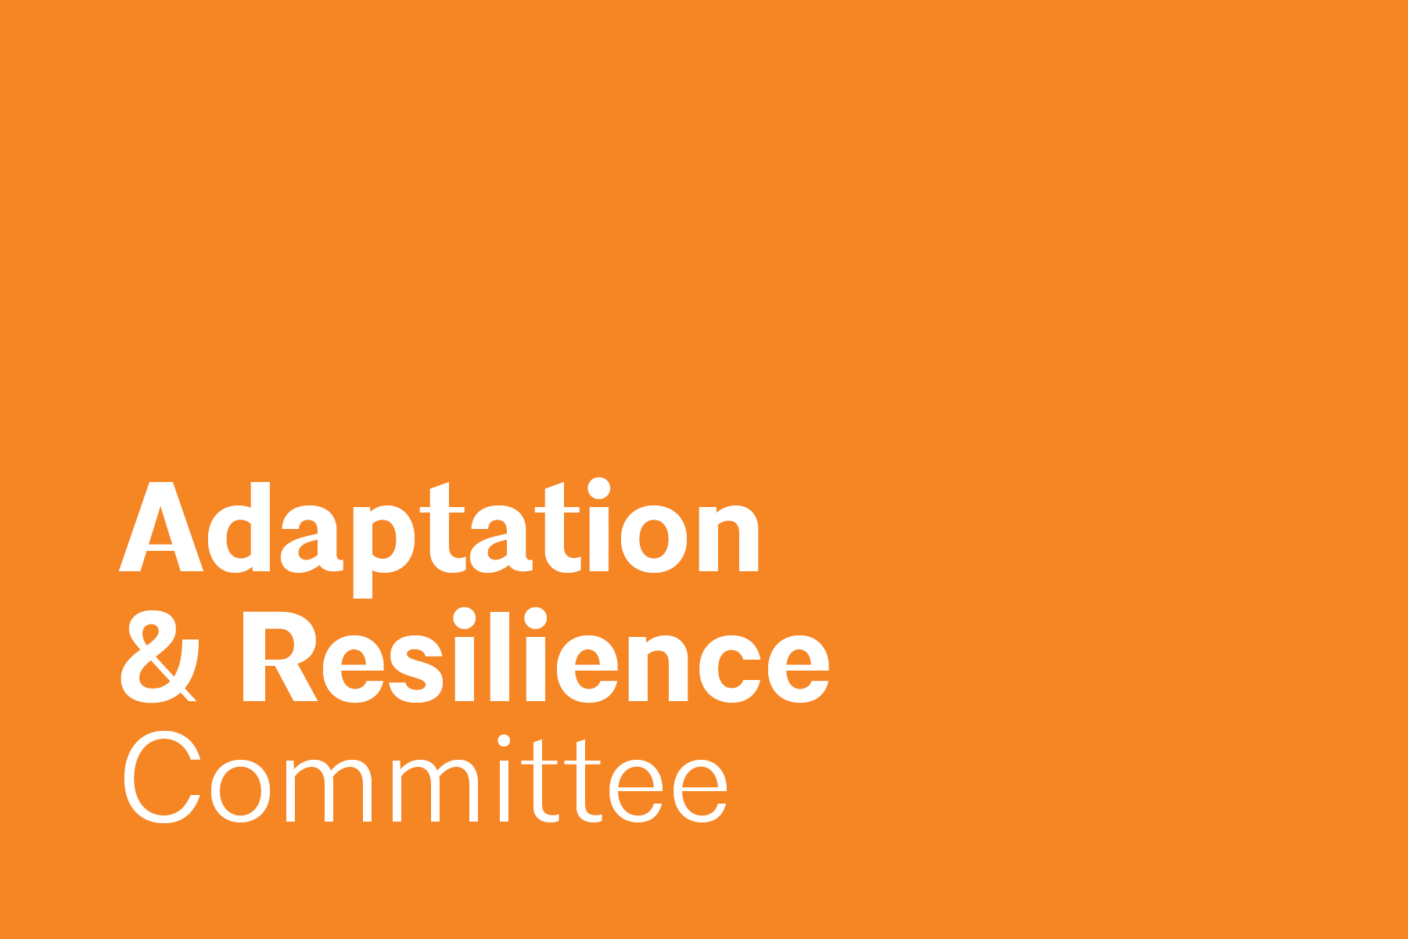 The Adaptation & Resilience Committee (formerly the Disaster Preparedness & Response Committee) informs and designs professional action in preparing for and responding to stressors and shocks that communities may face.